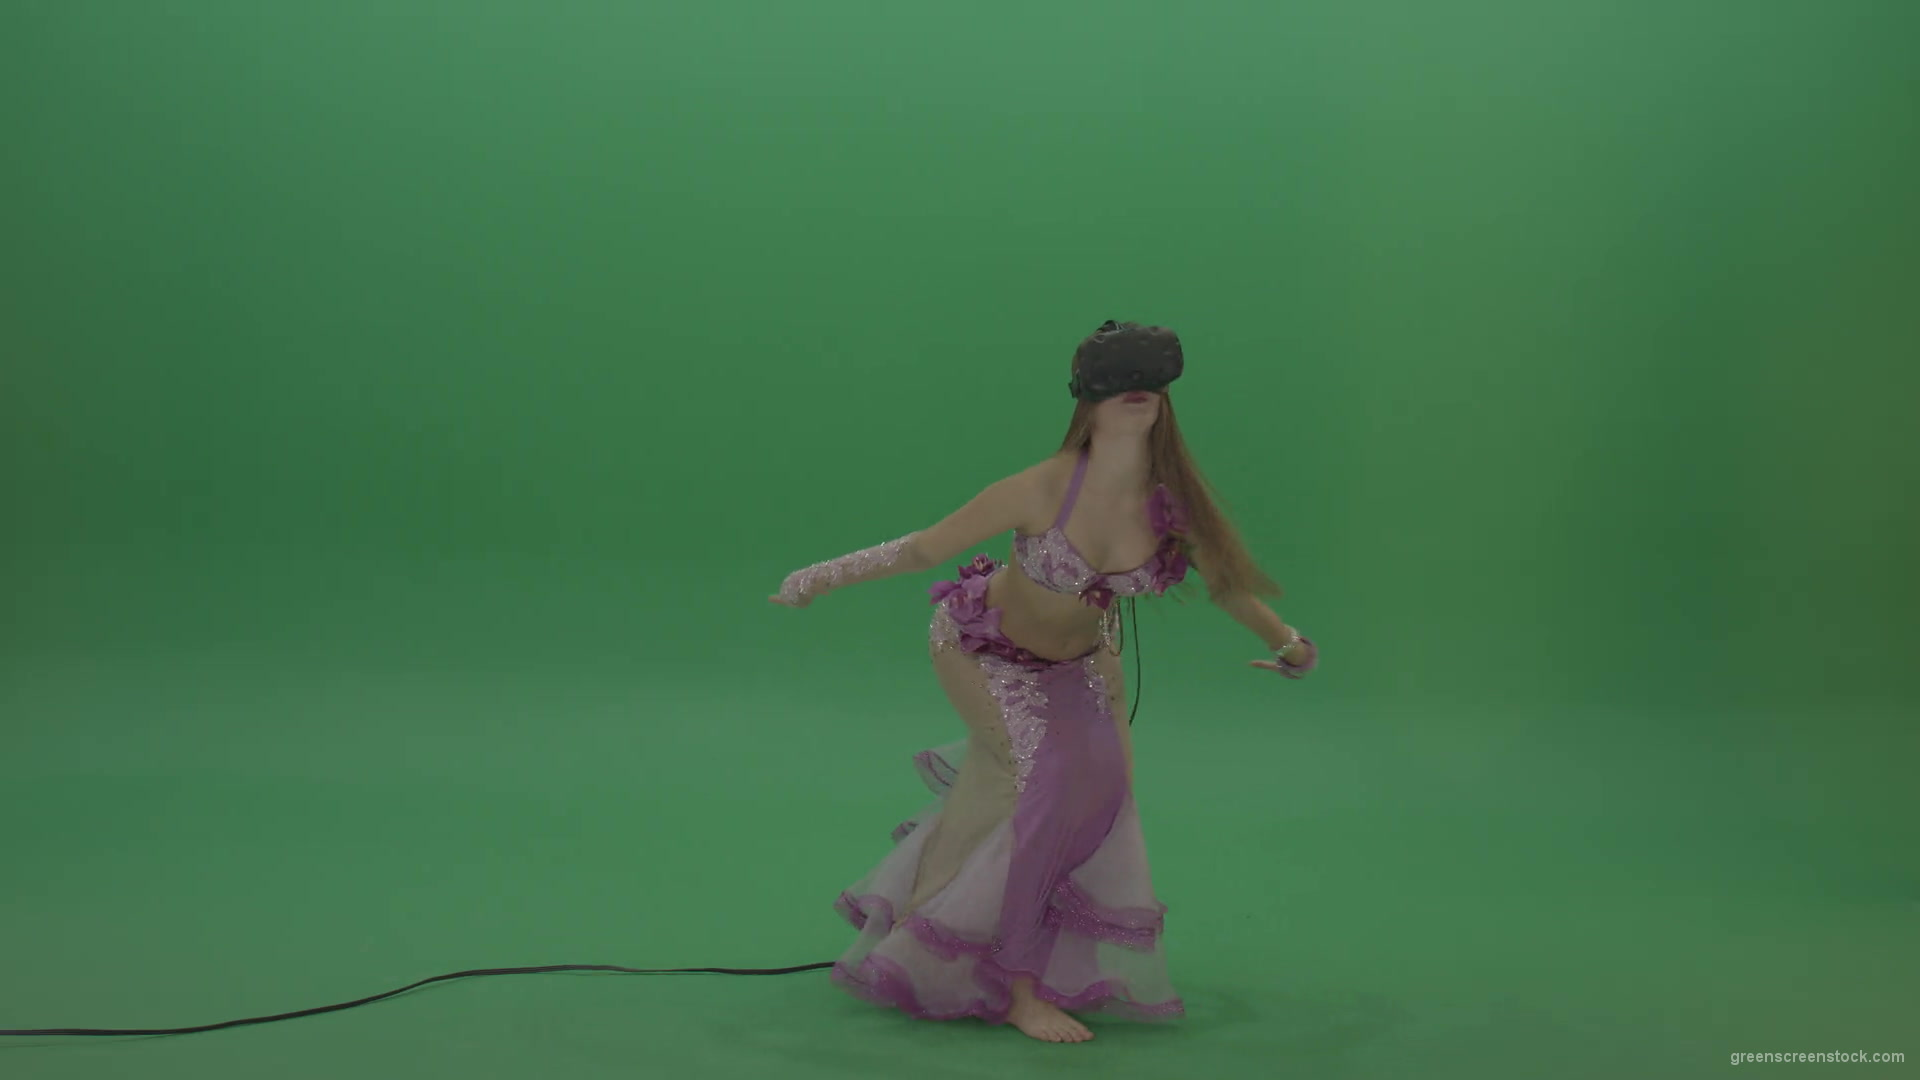 Beautiful-belly-dancer-in-purple-wear-and-VR-headset-dances-over-green-screen-background-1920_005 Green Screen Stock